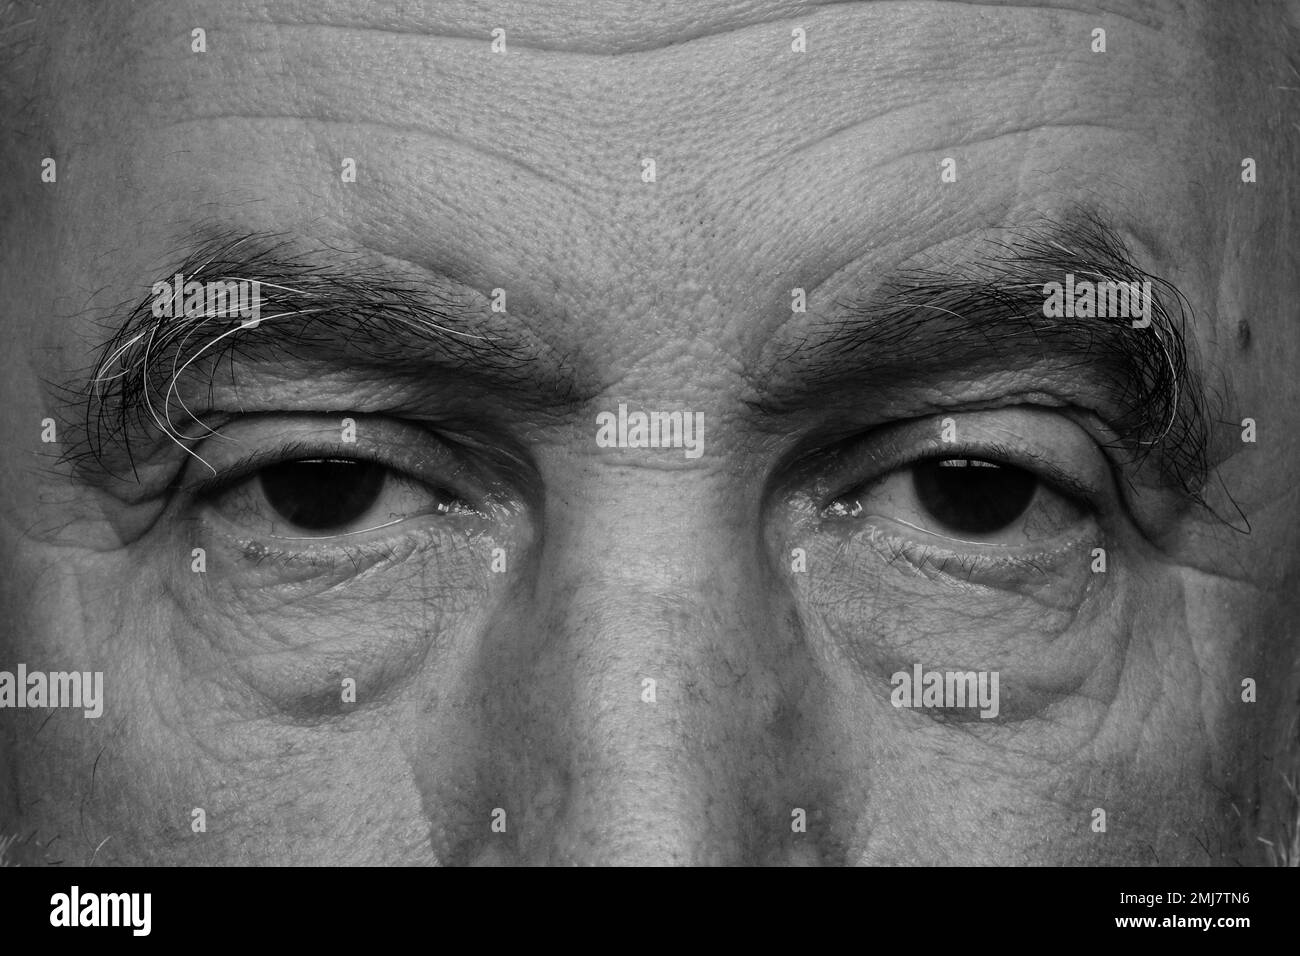 The old man's eyes in black and white. Stock Photo